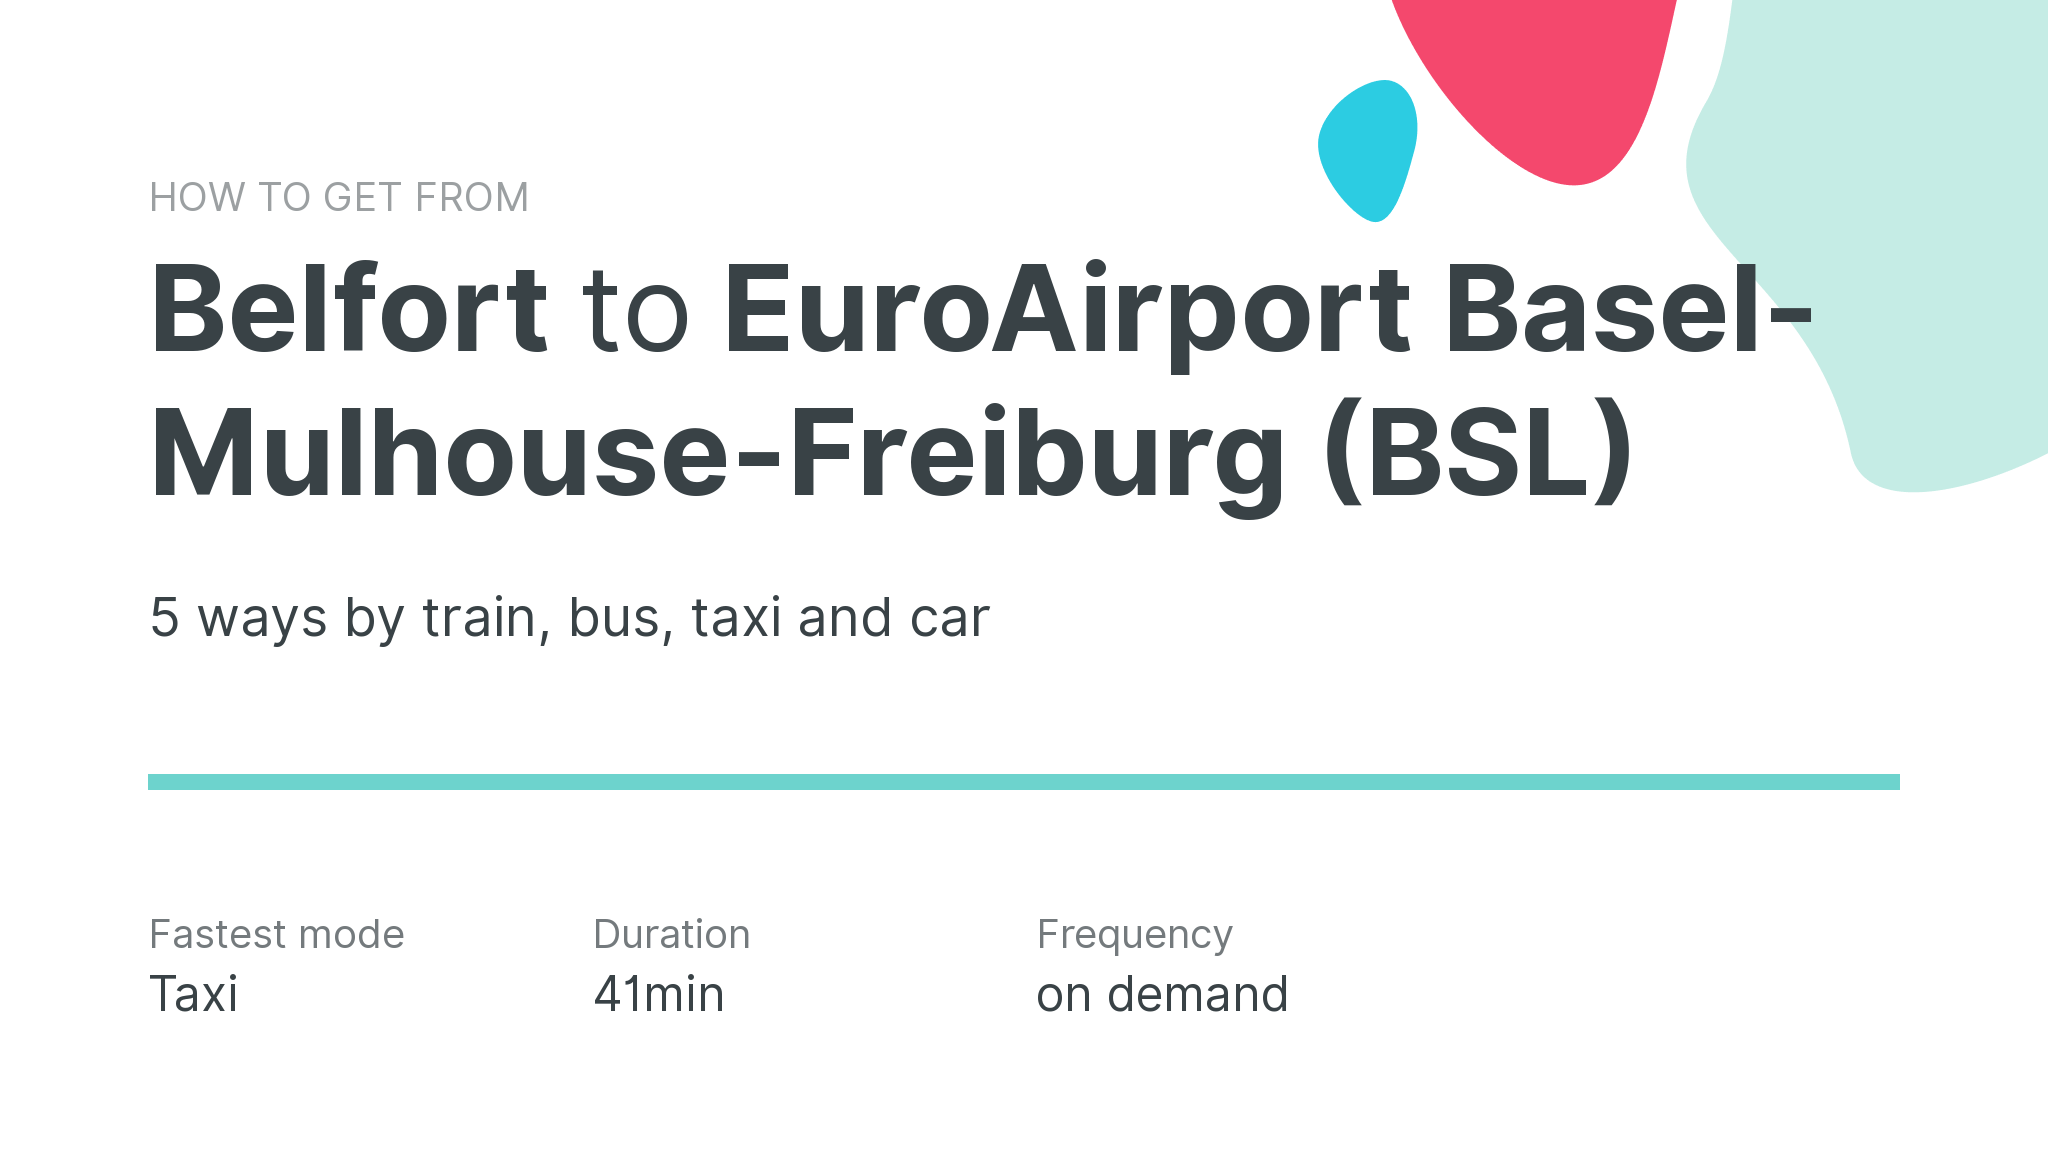 How do I get from Belfort to EuroAirport Basel-Mulhouse-Freiburg (BSL)